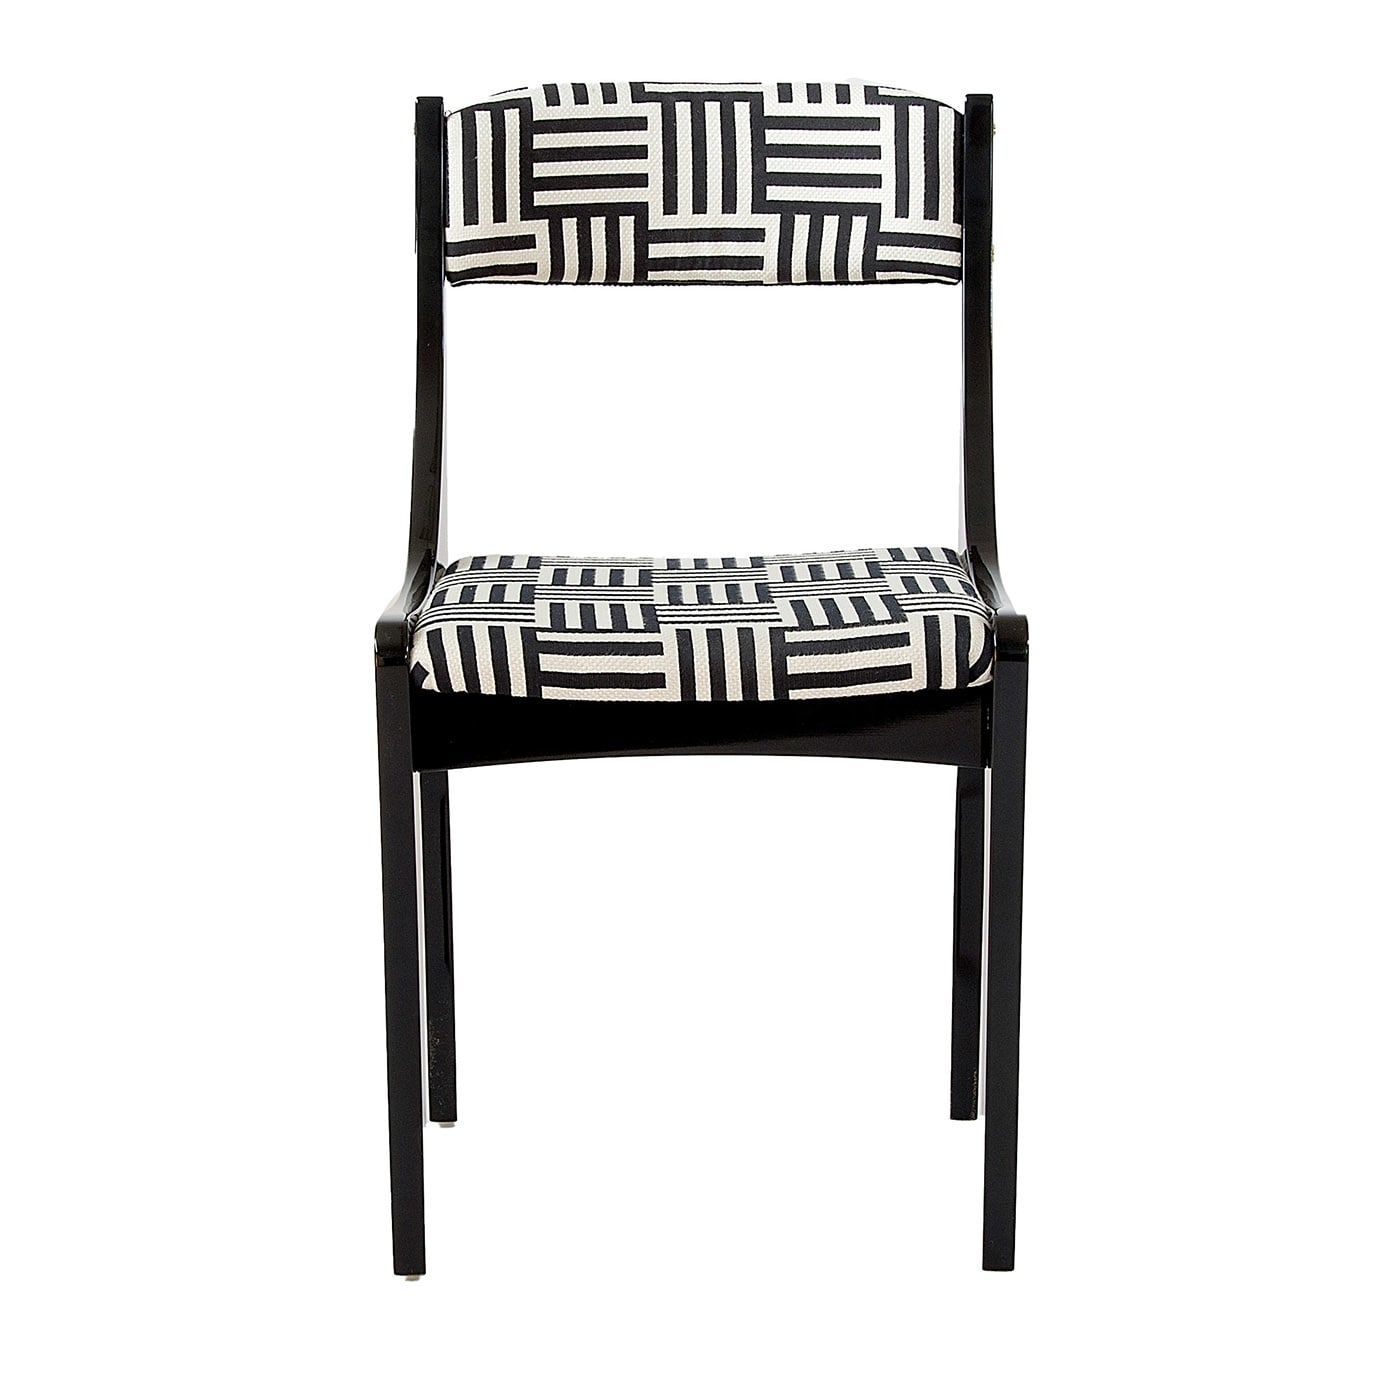 Lola 50's-Inspired Black & White Chair - Extroverso